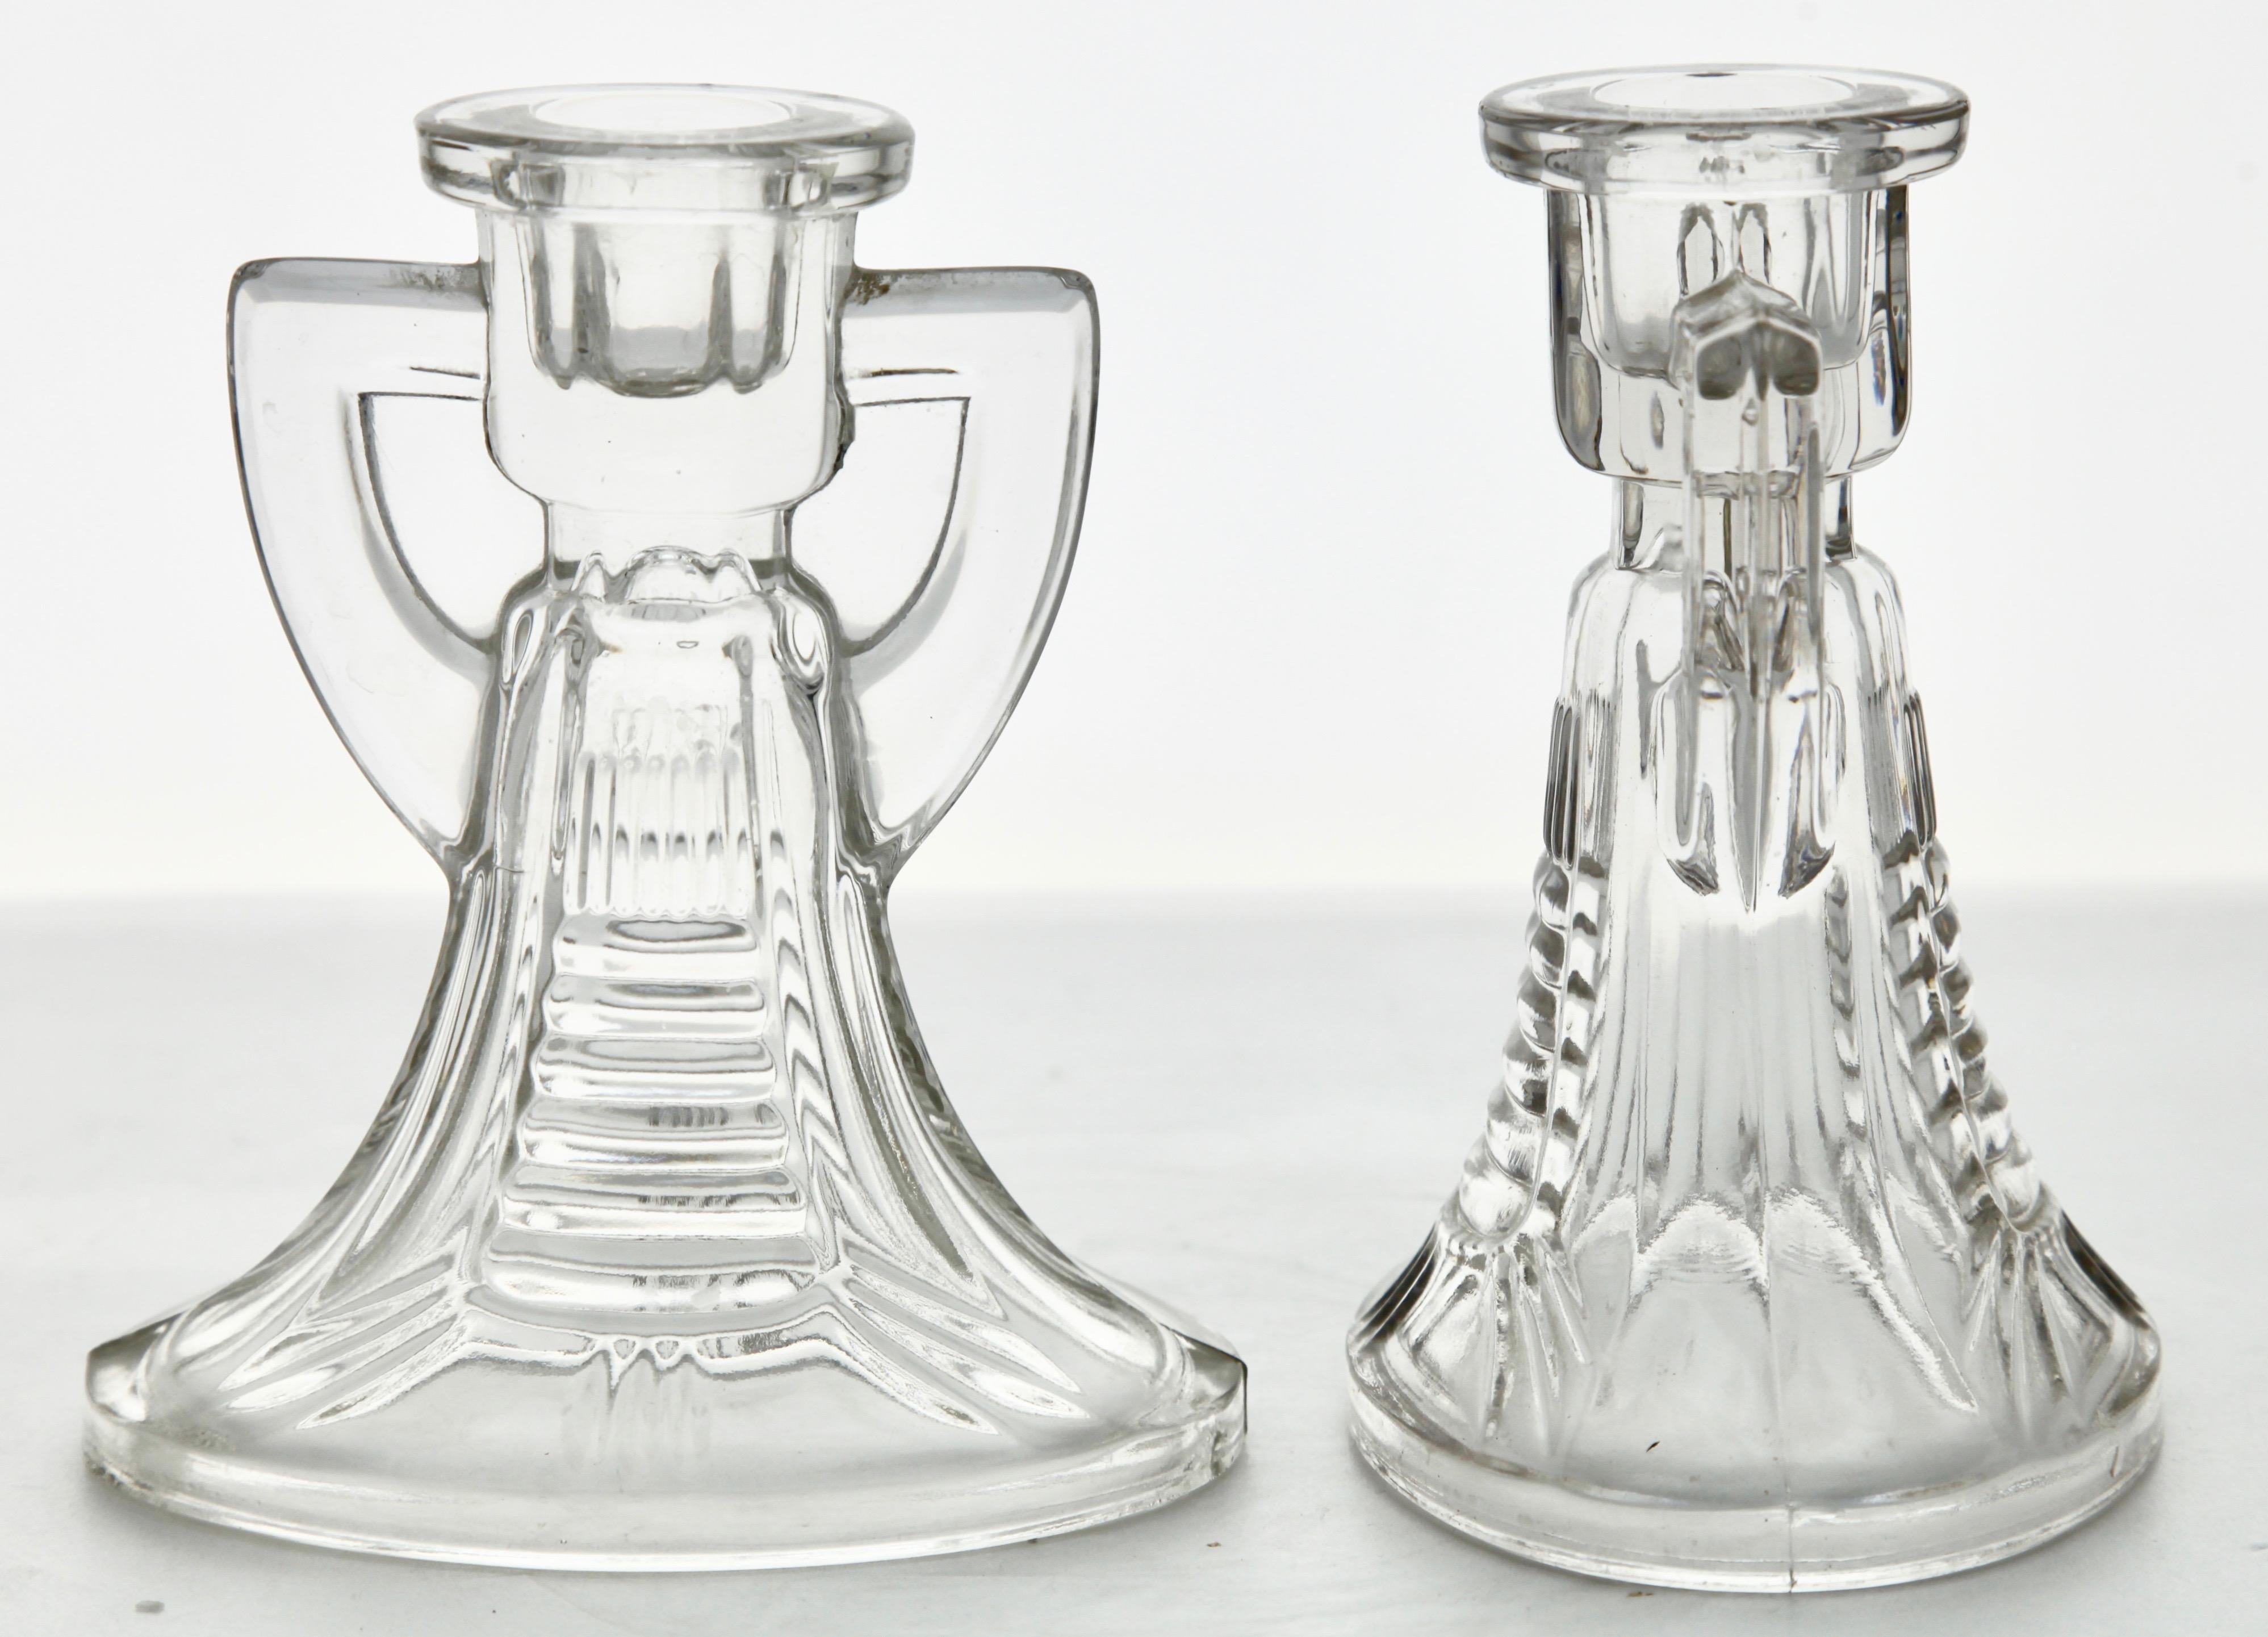 Victoria pattern, 1935, Belgium
Pair of very nice Rosaline Art Deco candlesticks made by Val Saint-Lambert. (More in stock).
From the Luxval range by Charles Graffart and René Delvenne.
Named after European monarchs, the Victoria pattern is